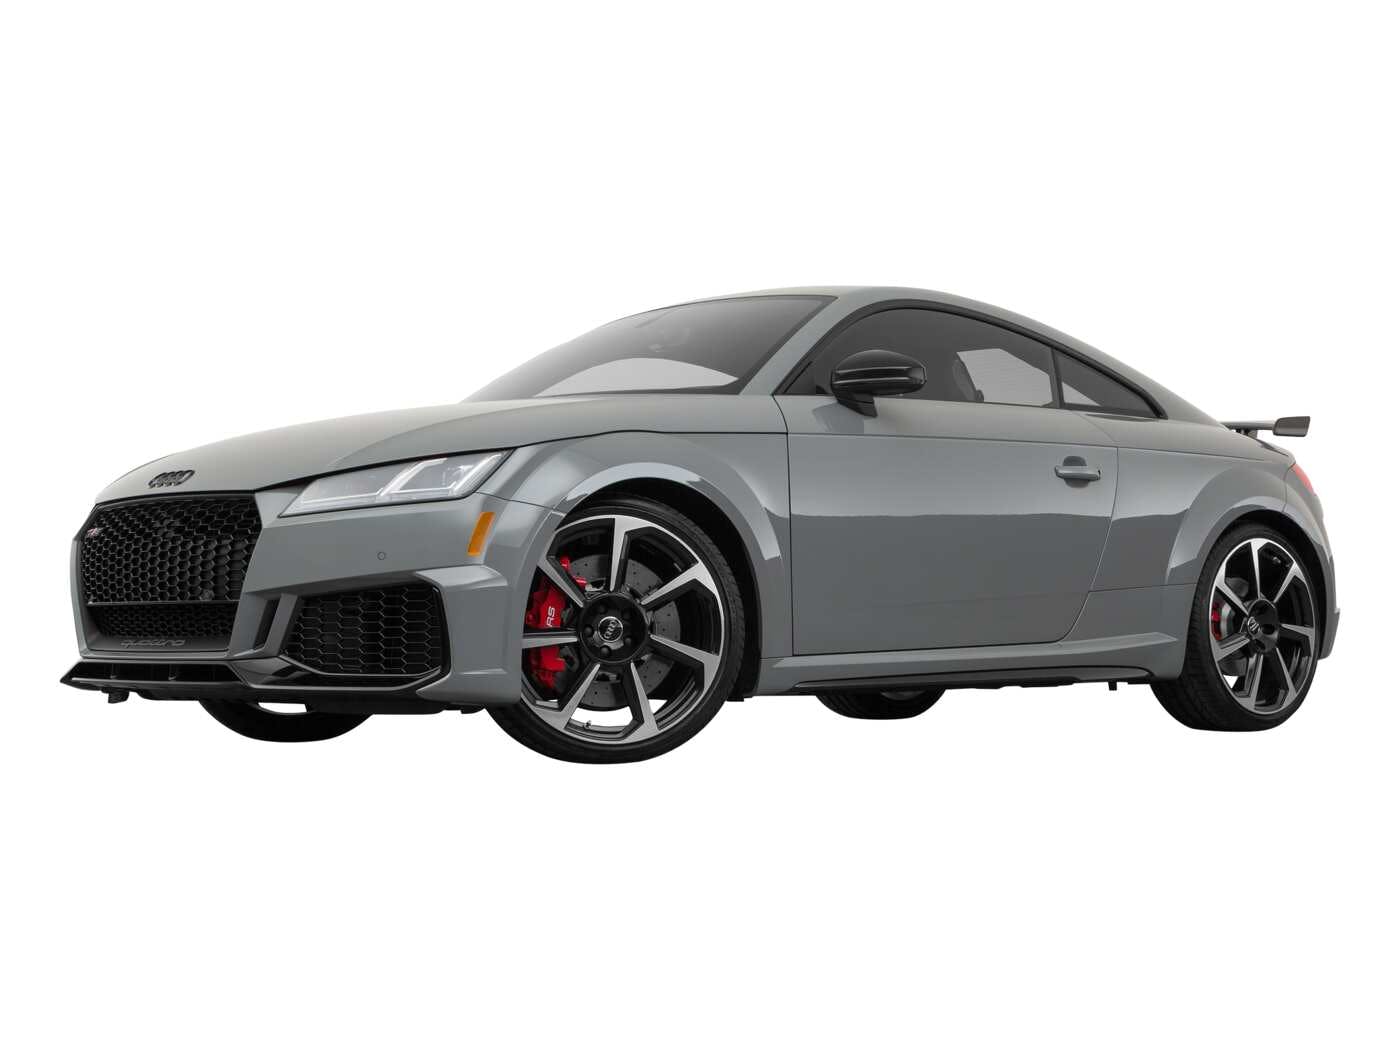 2019 Audi TT RS : Latest Prices, Reviews, Specs, Photos and Incentives